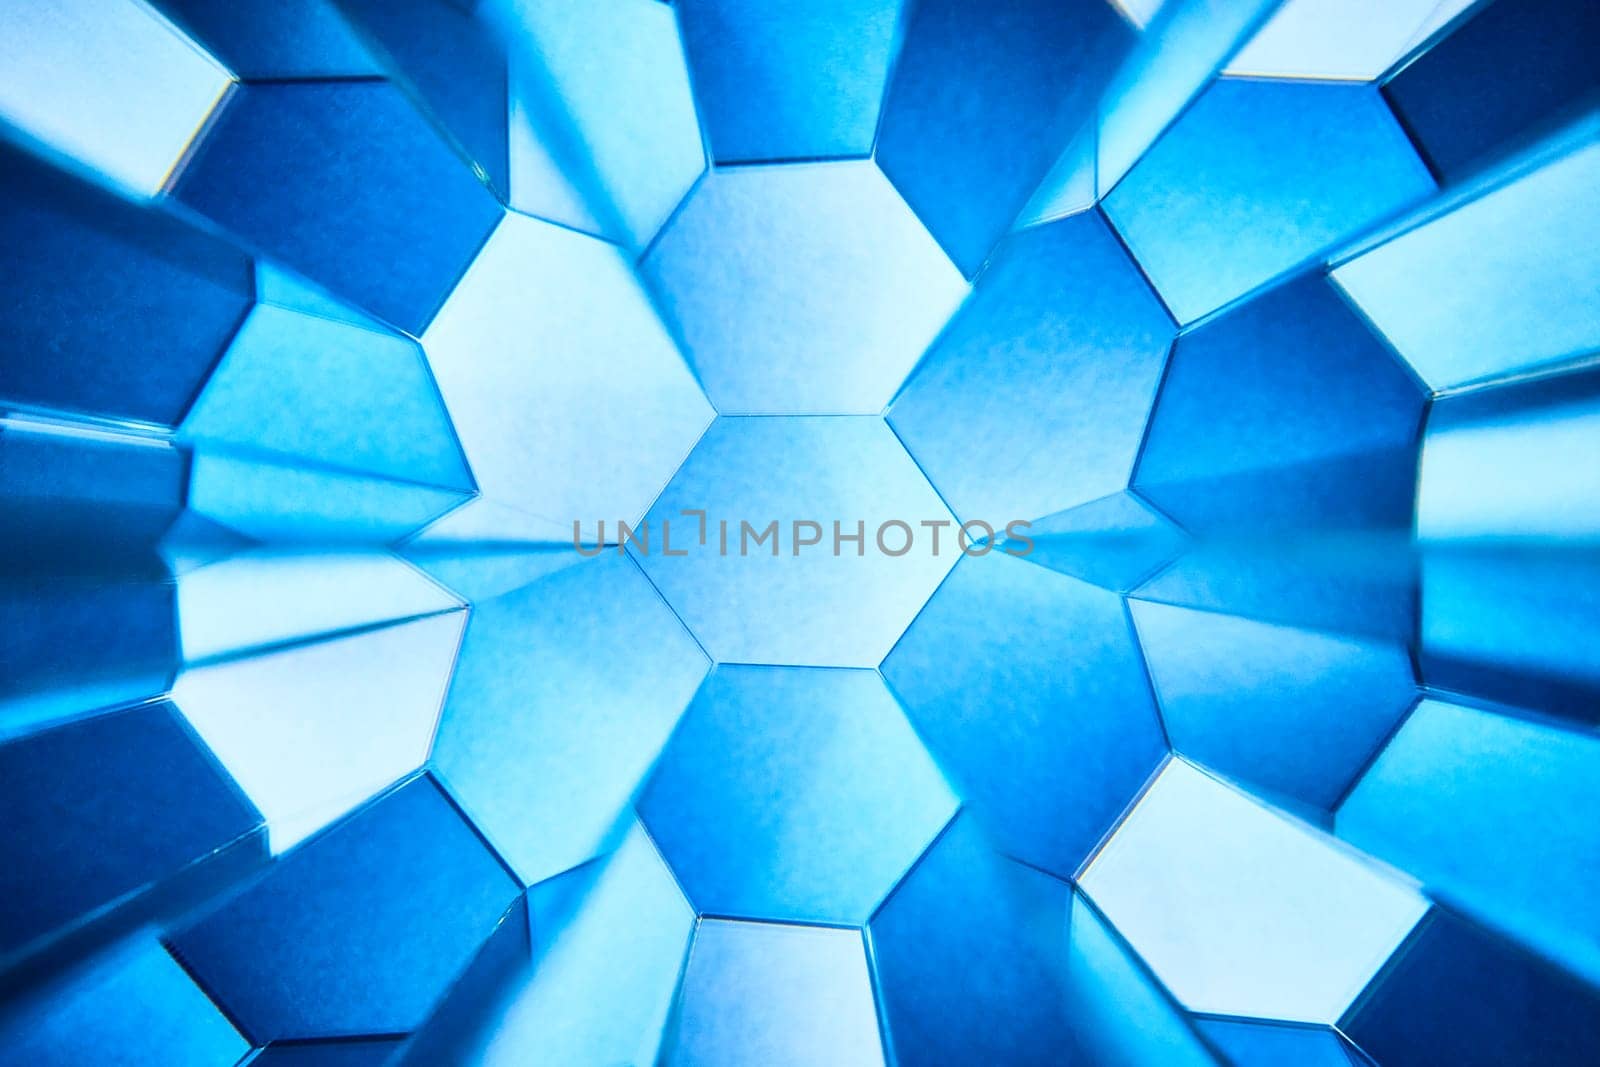 Abstract Kaleidoscopic View of Hexagonal Geometric Pattern in Cool Blue Shades, Perfect for Design and Technology Concepts